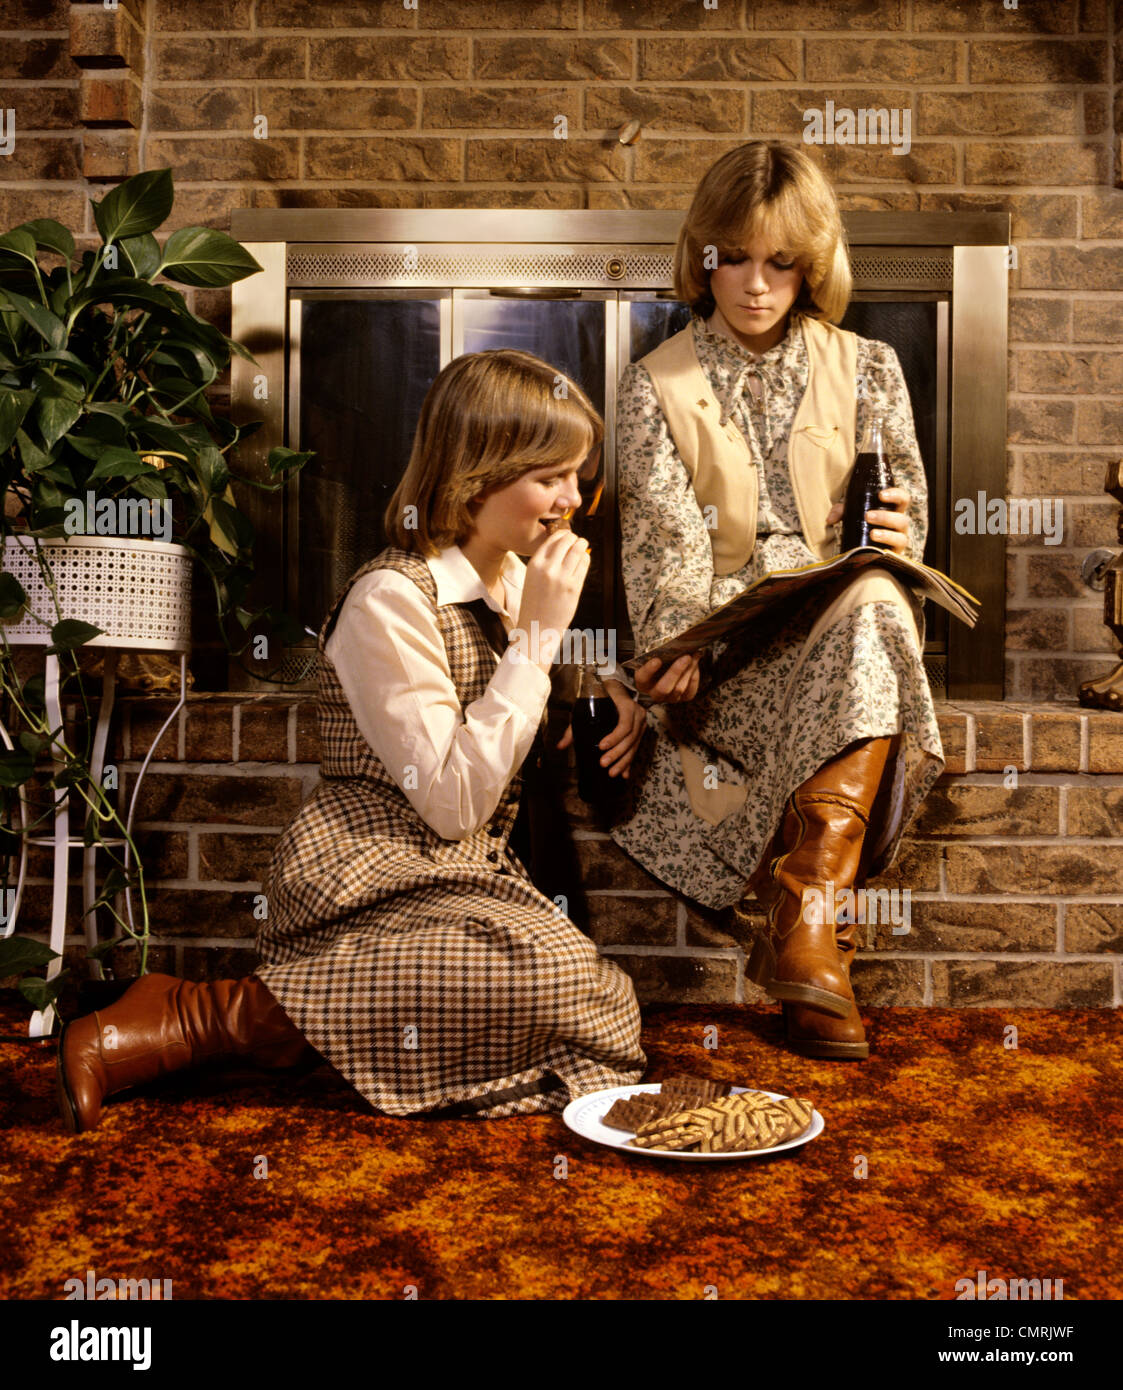 1980 1980s 2 TEENAGE GIRLS SISTERS SIT ON HEARTH READING MAGAZINE EAT COOKIES FASHION CLOTHES TEENS BOOTS SKIRTS RETRO Stock Photo